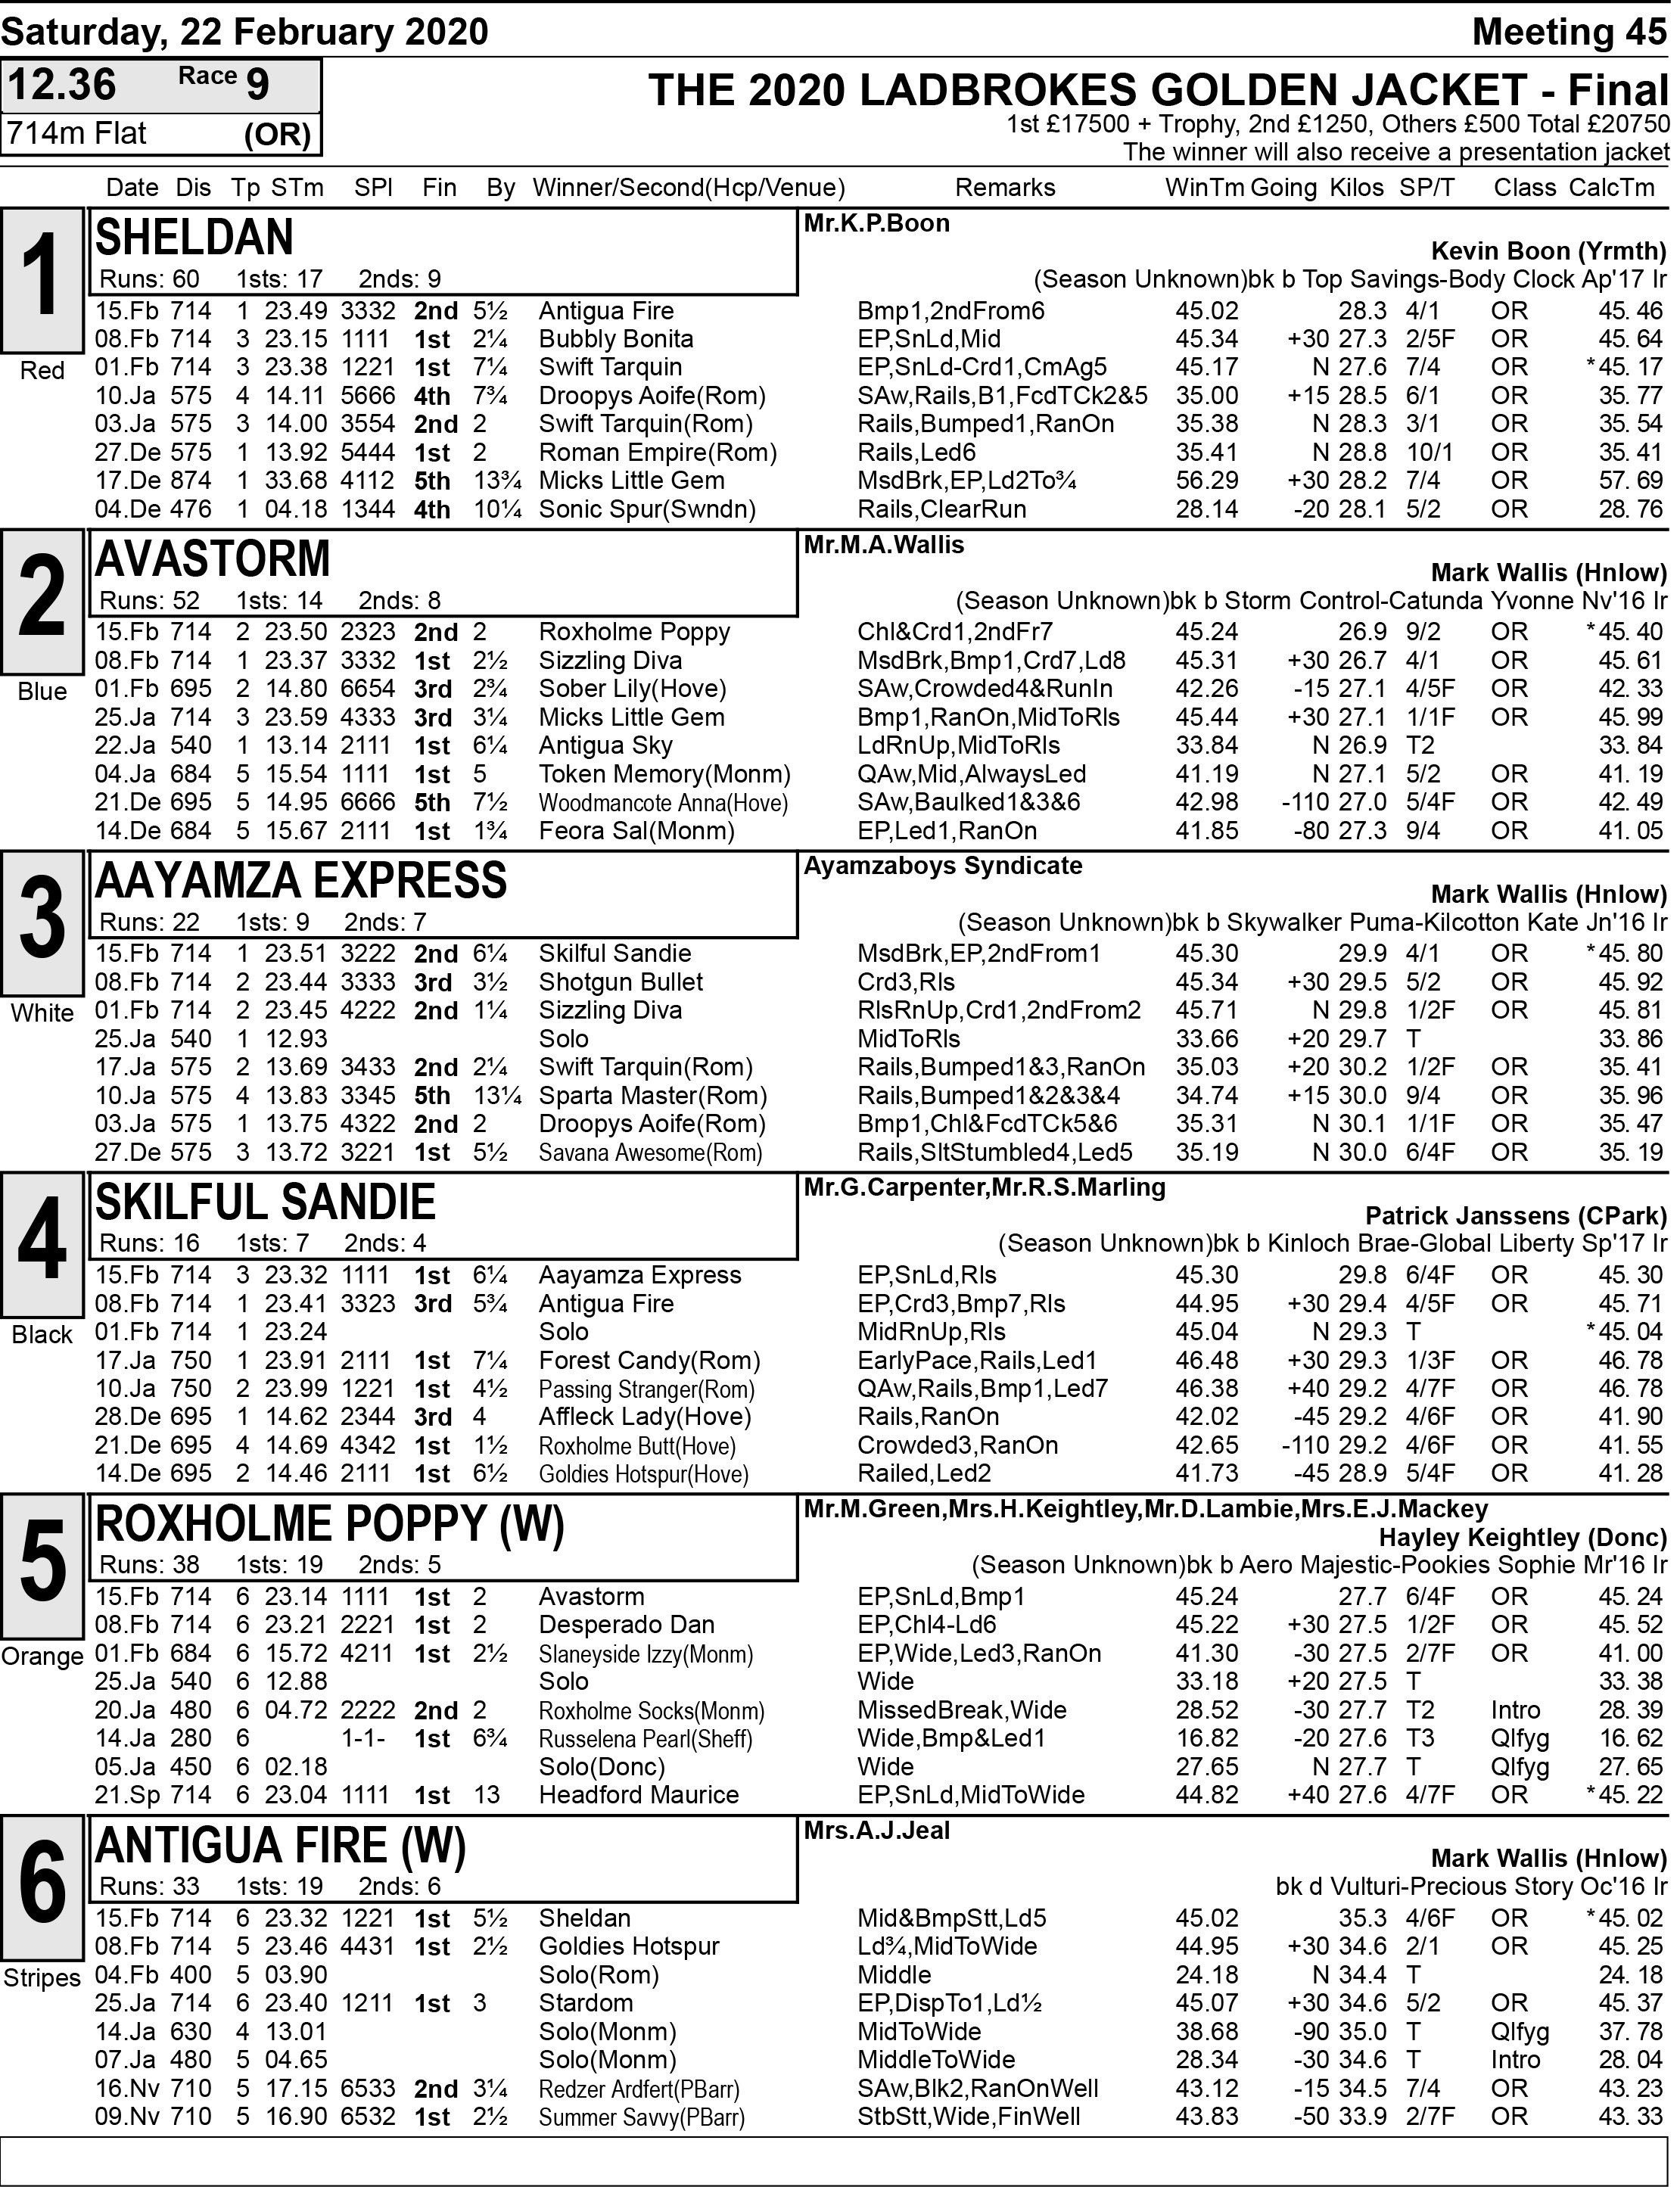 UPDATED GOLDEN JACKET FINALISTS Greyhound Star News from the